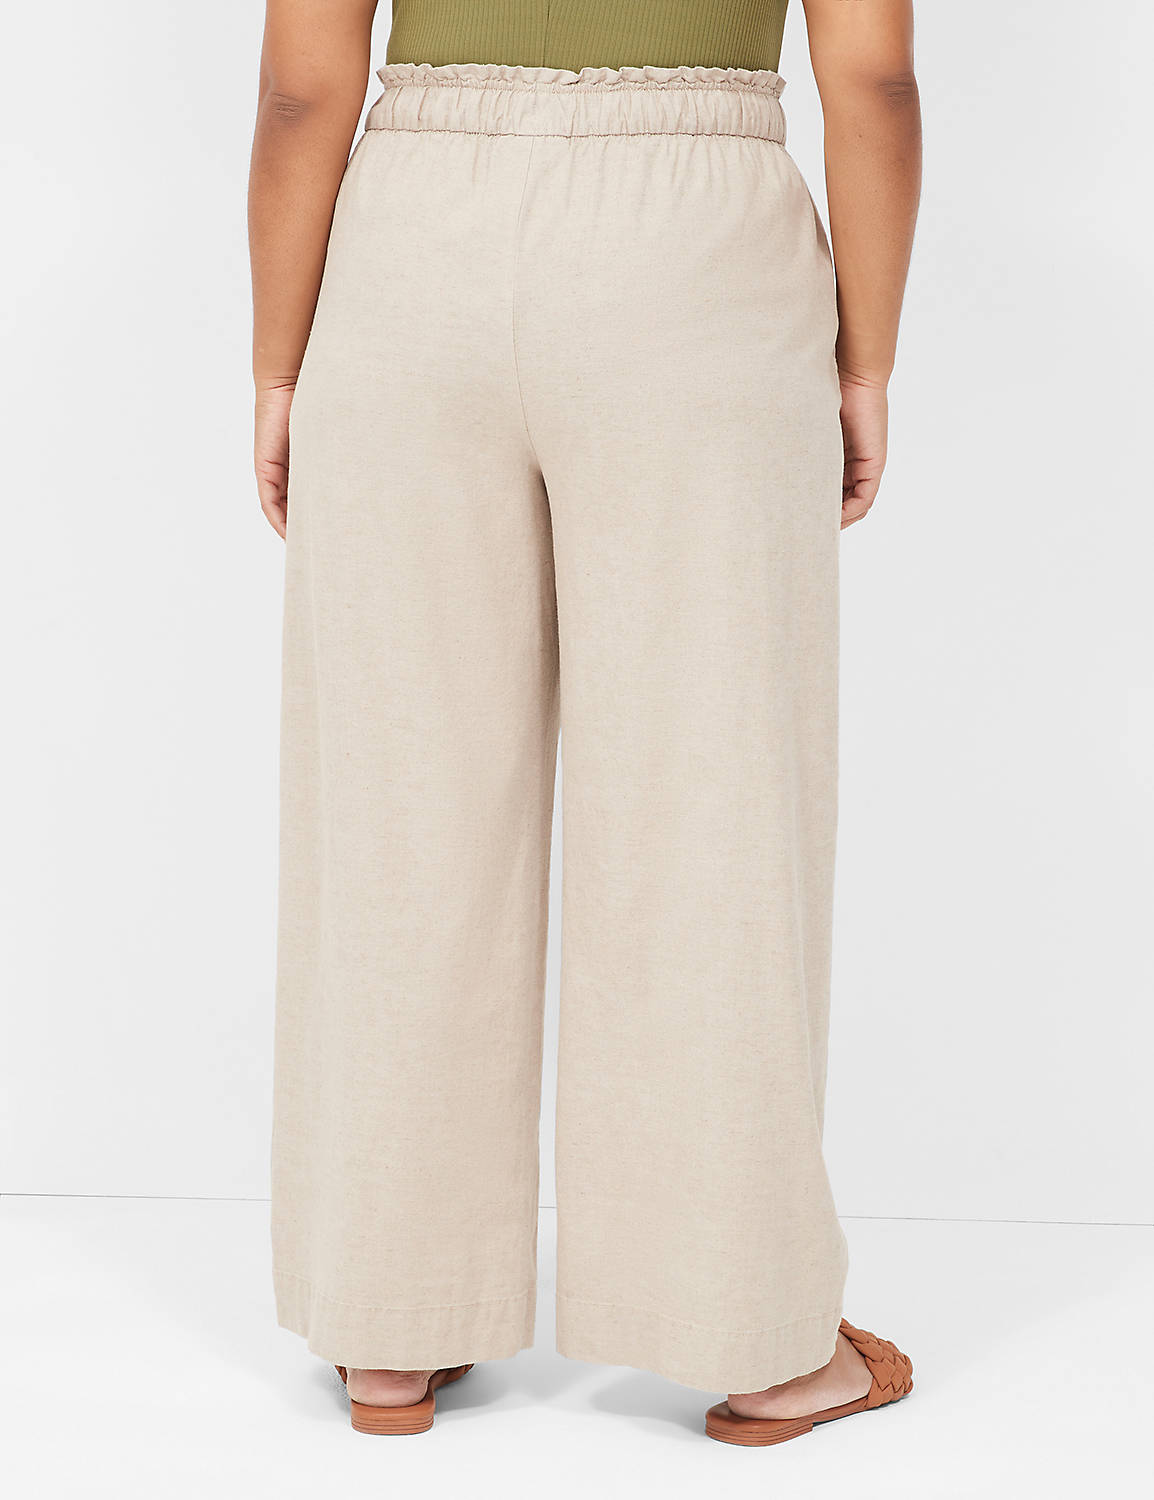 The Softest Wideleg - Linen 1141254 Product Image 2